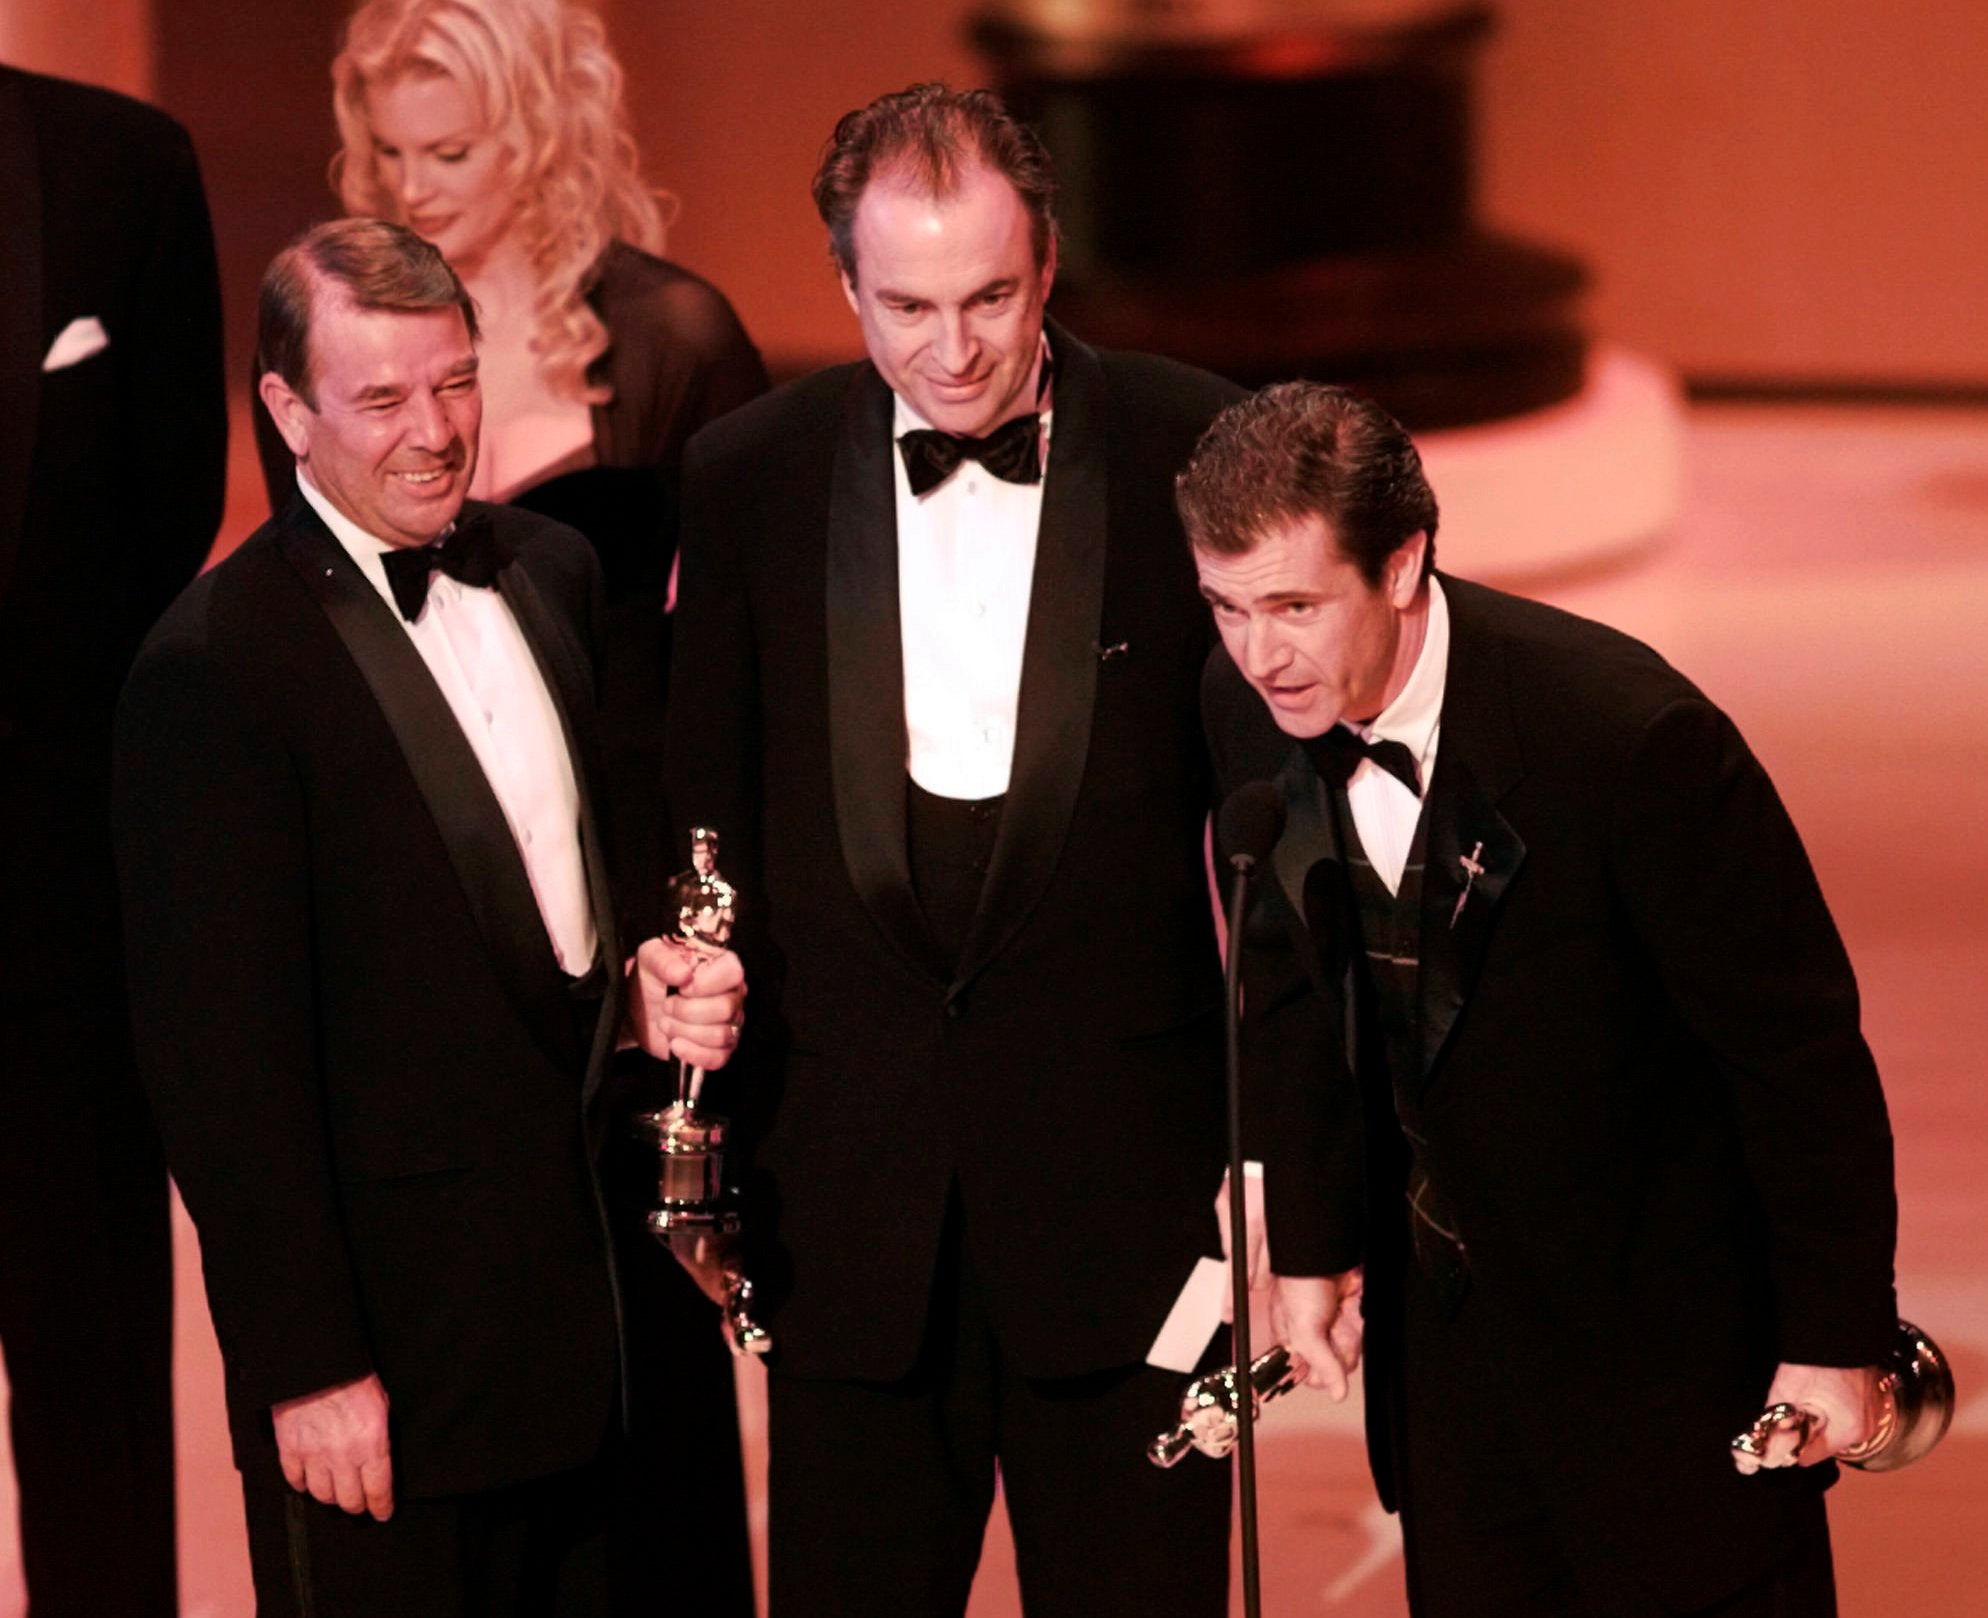 Mel Gibson, right, accepts the award for Best Picture for "Braveheart" at the 68th Annual Academy Awards in Los Angeles, Looking on are co-producers Alan Ladd Jr., left, and Bruce Davey